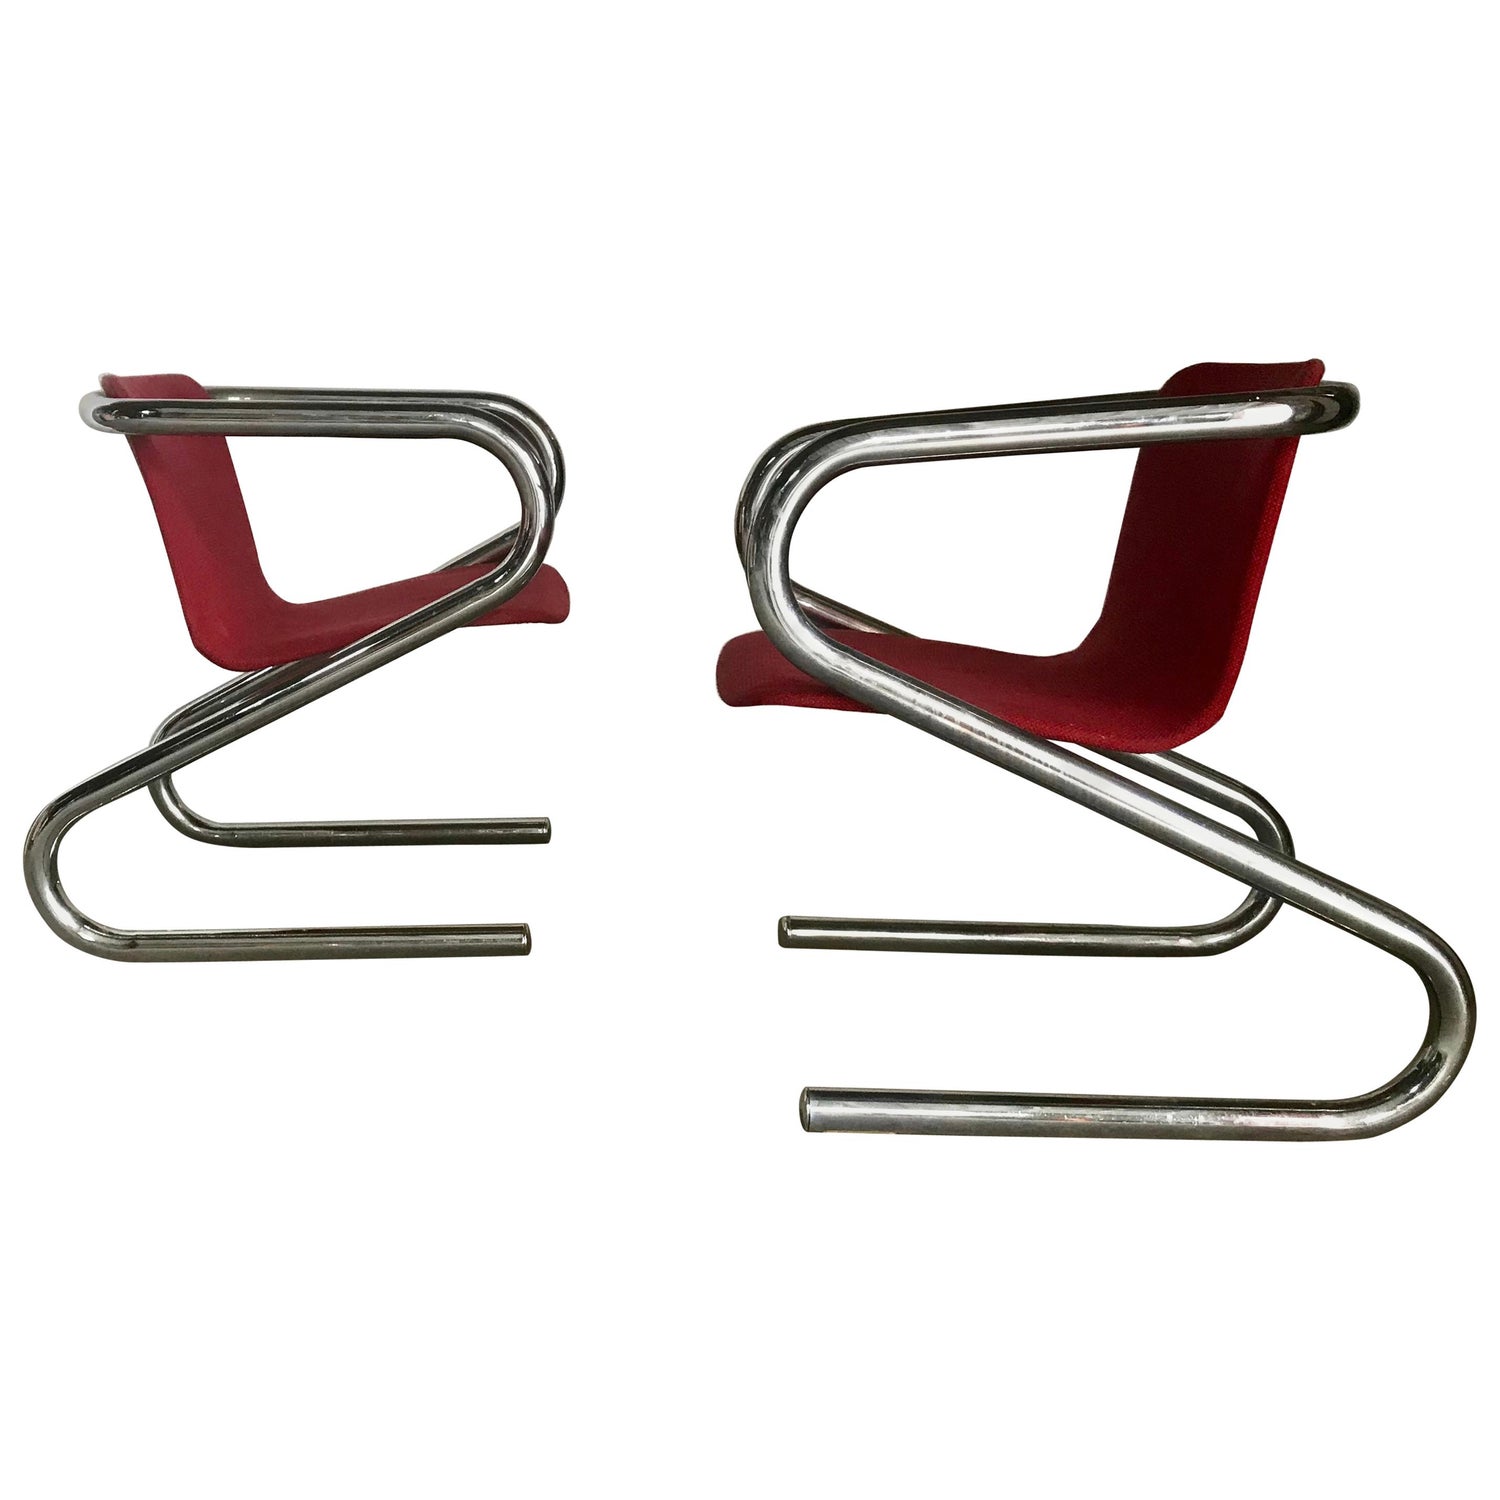 1970s Italian Tubular Chrome "Z" Lounge Chairs Attributed to Harvey Guzzini  For Sale at 1stDibs